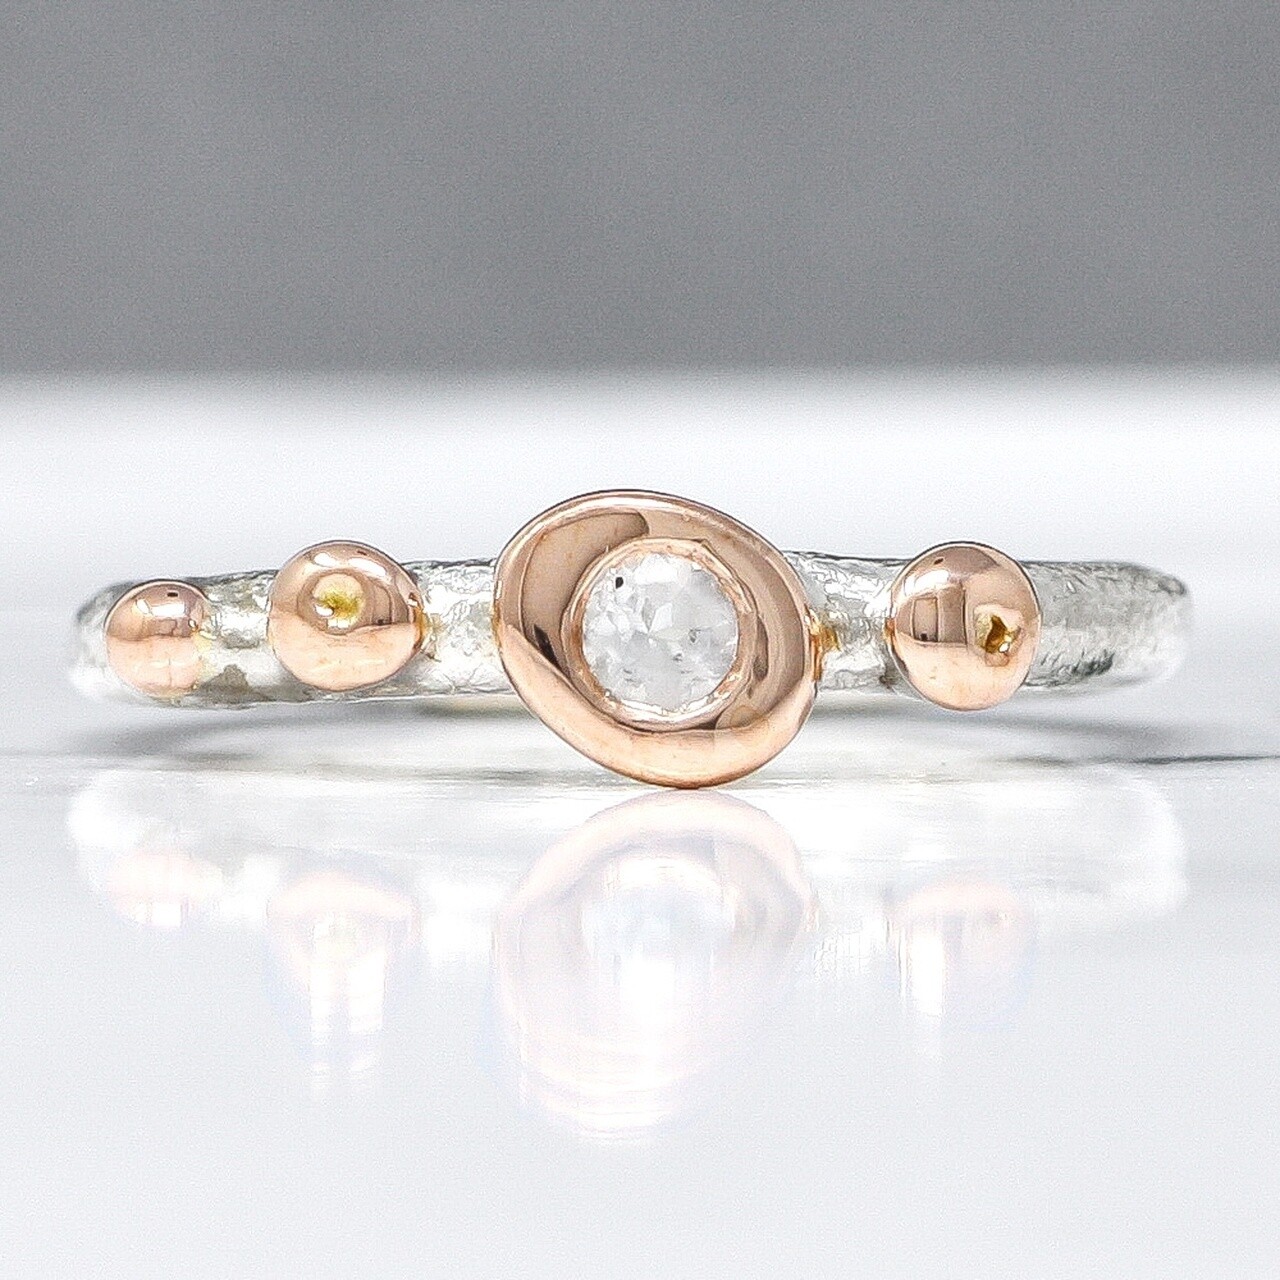 sea pebble silver and rose gold ring - moonstone by fi mehra